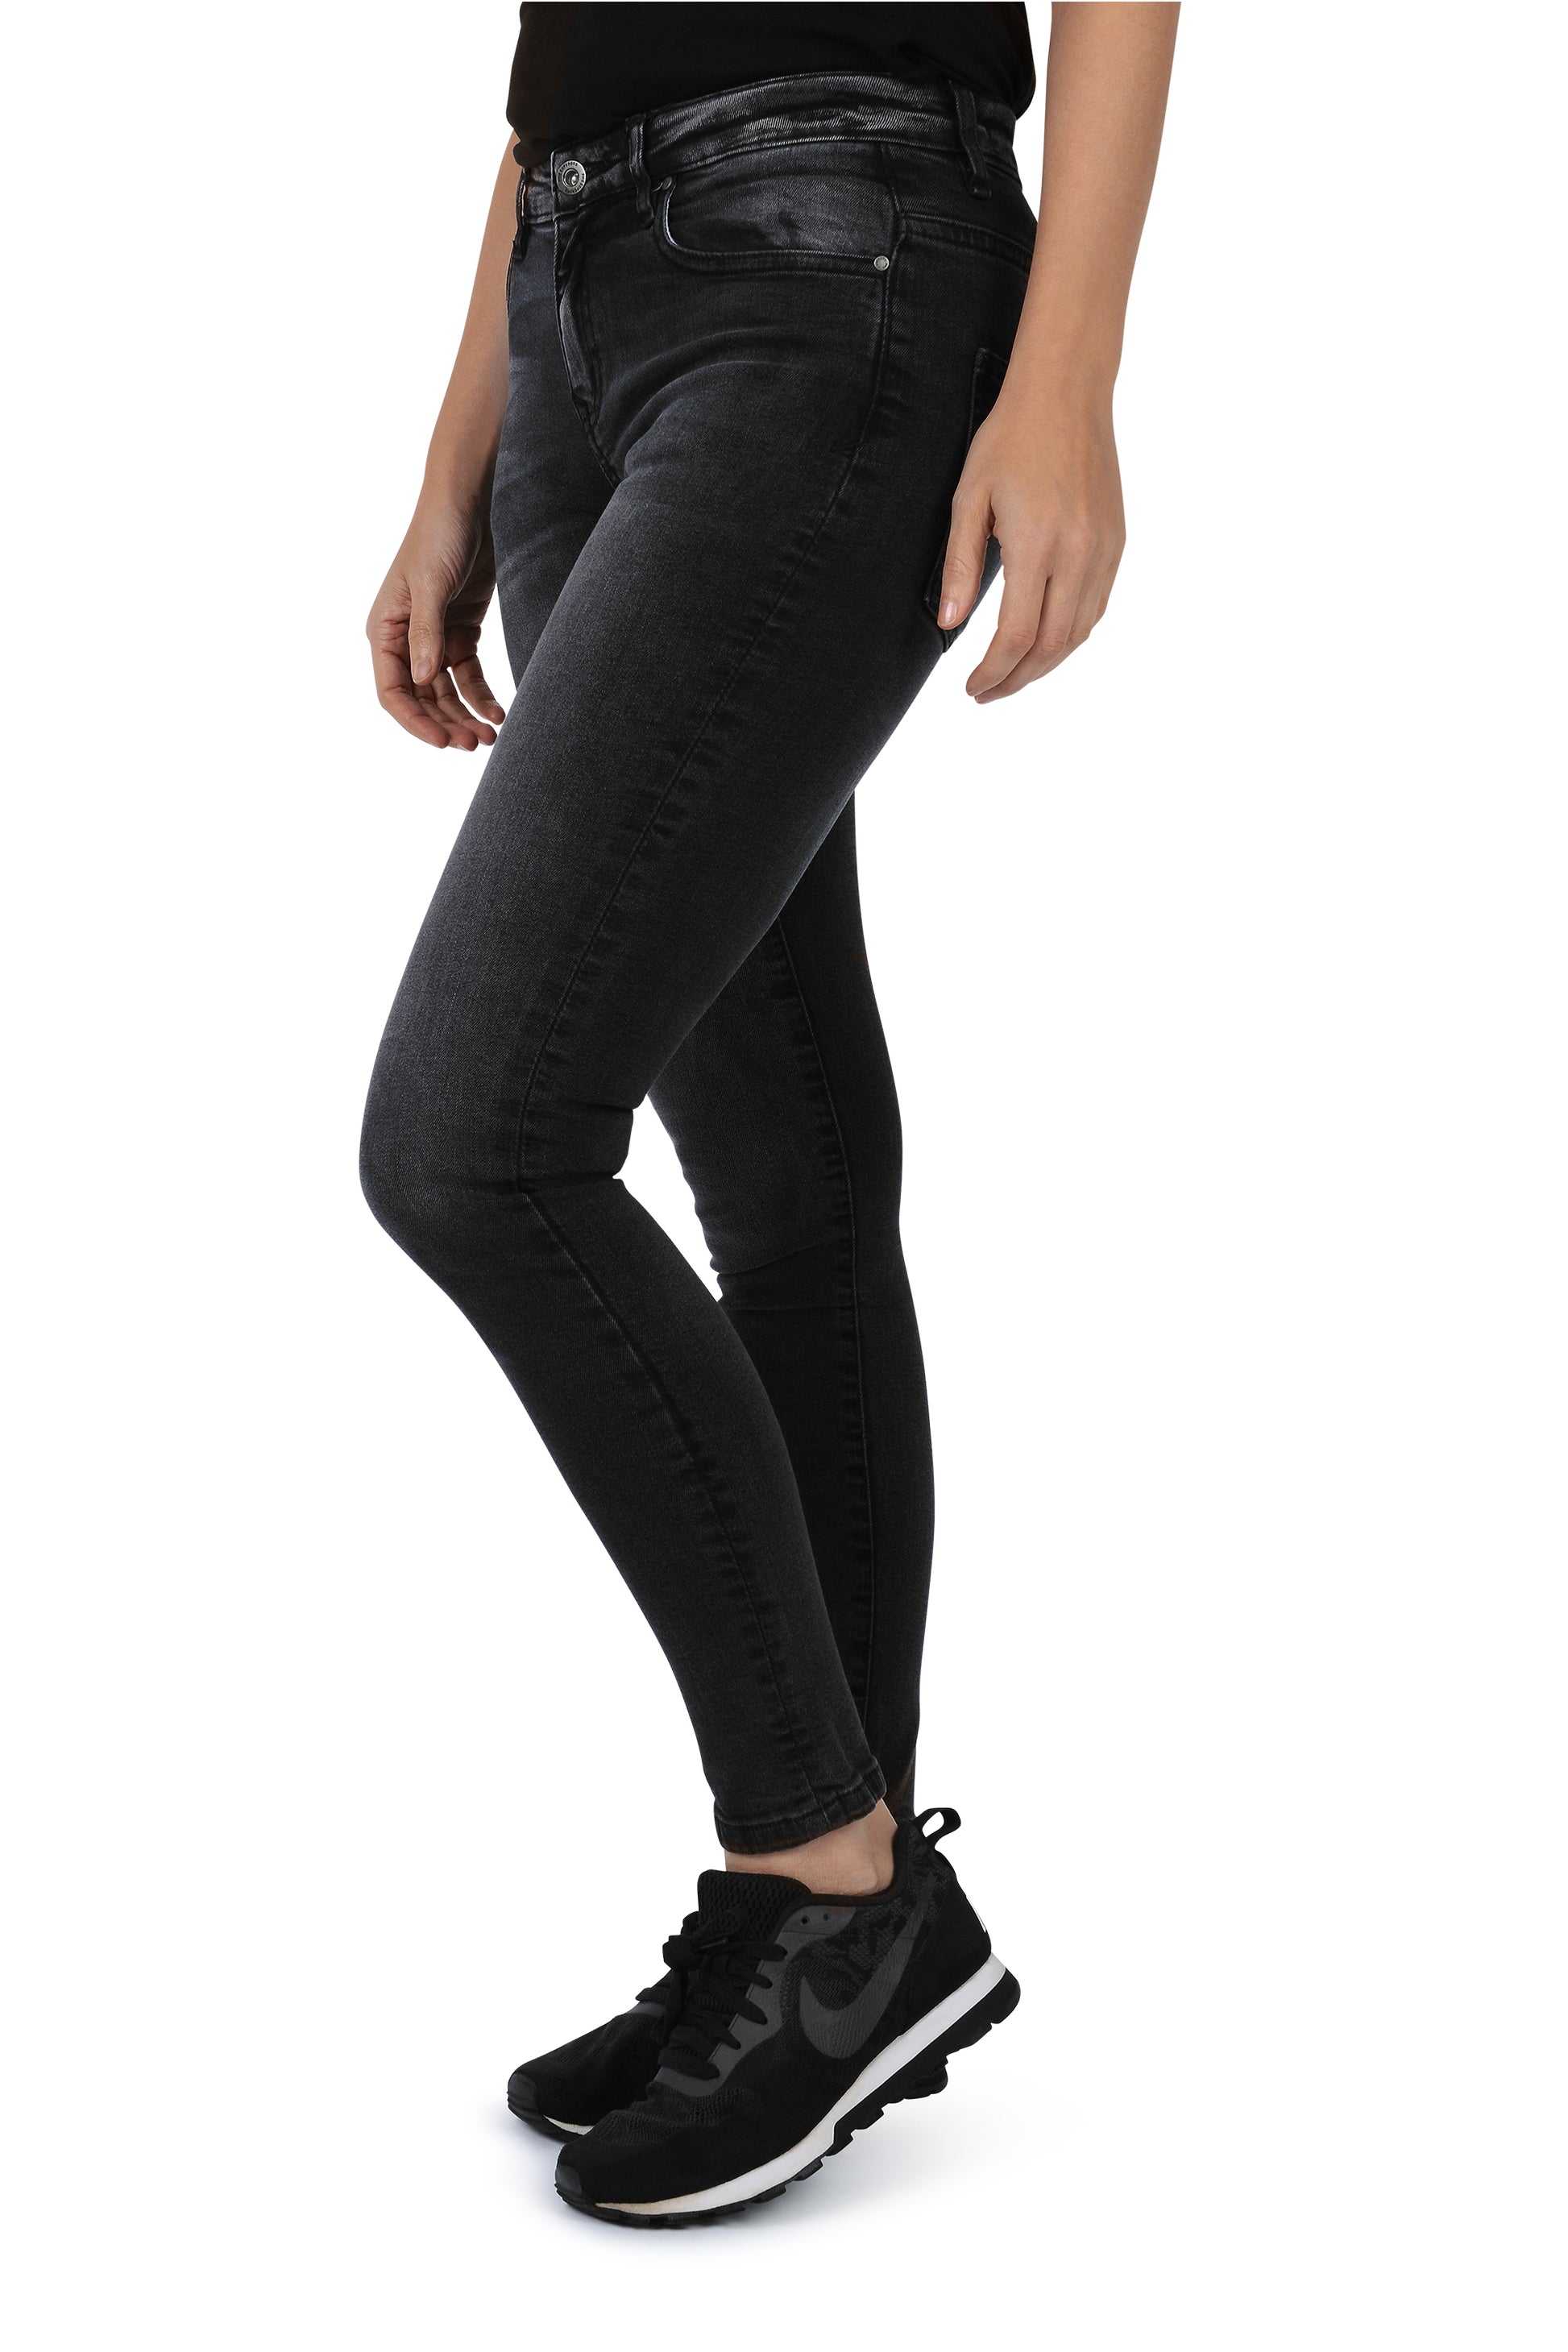 Skinny Fit Mid-Rise Jeans - Faded Black